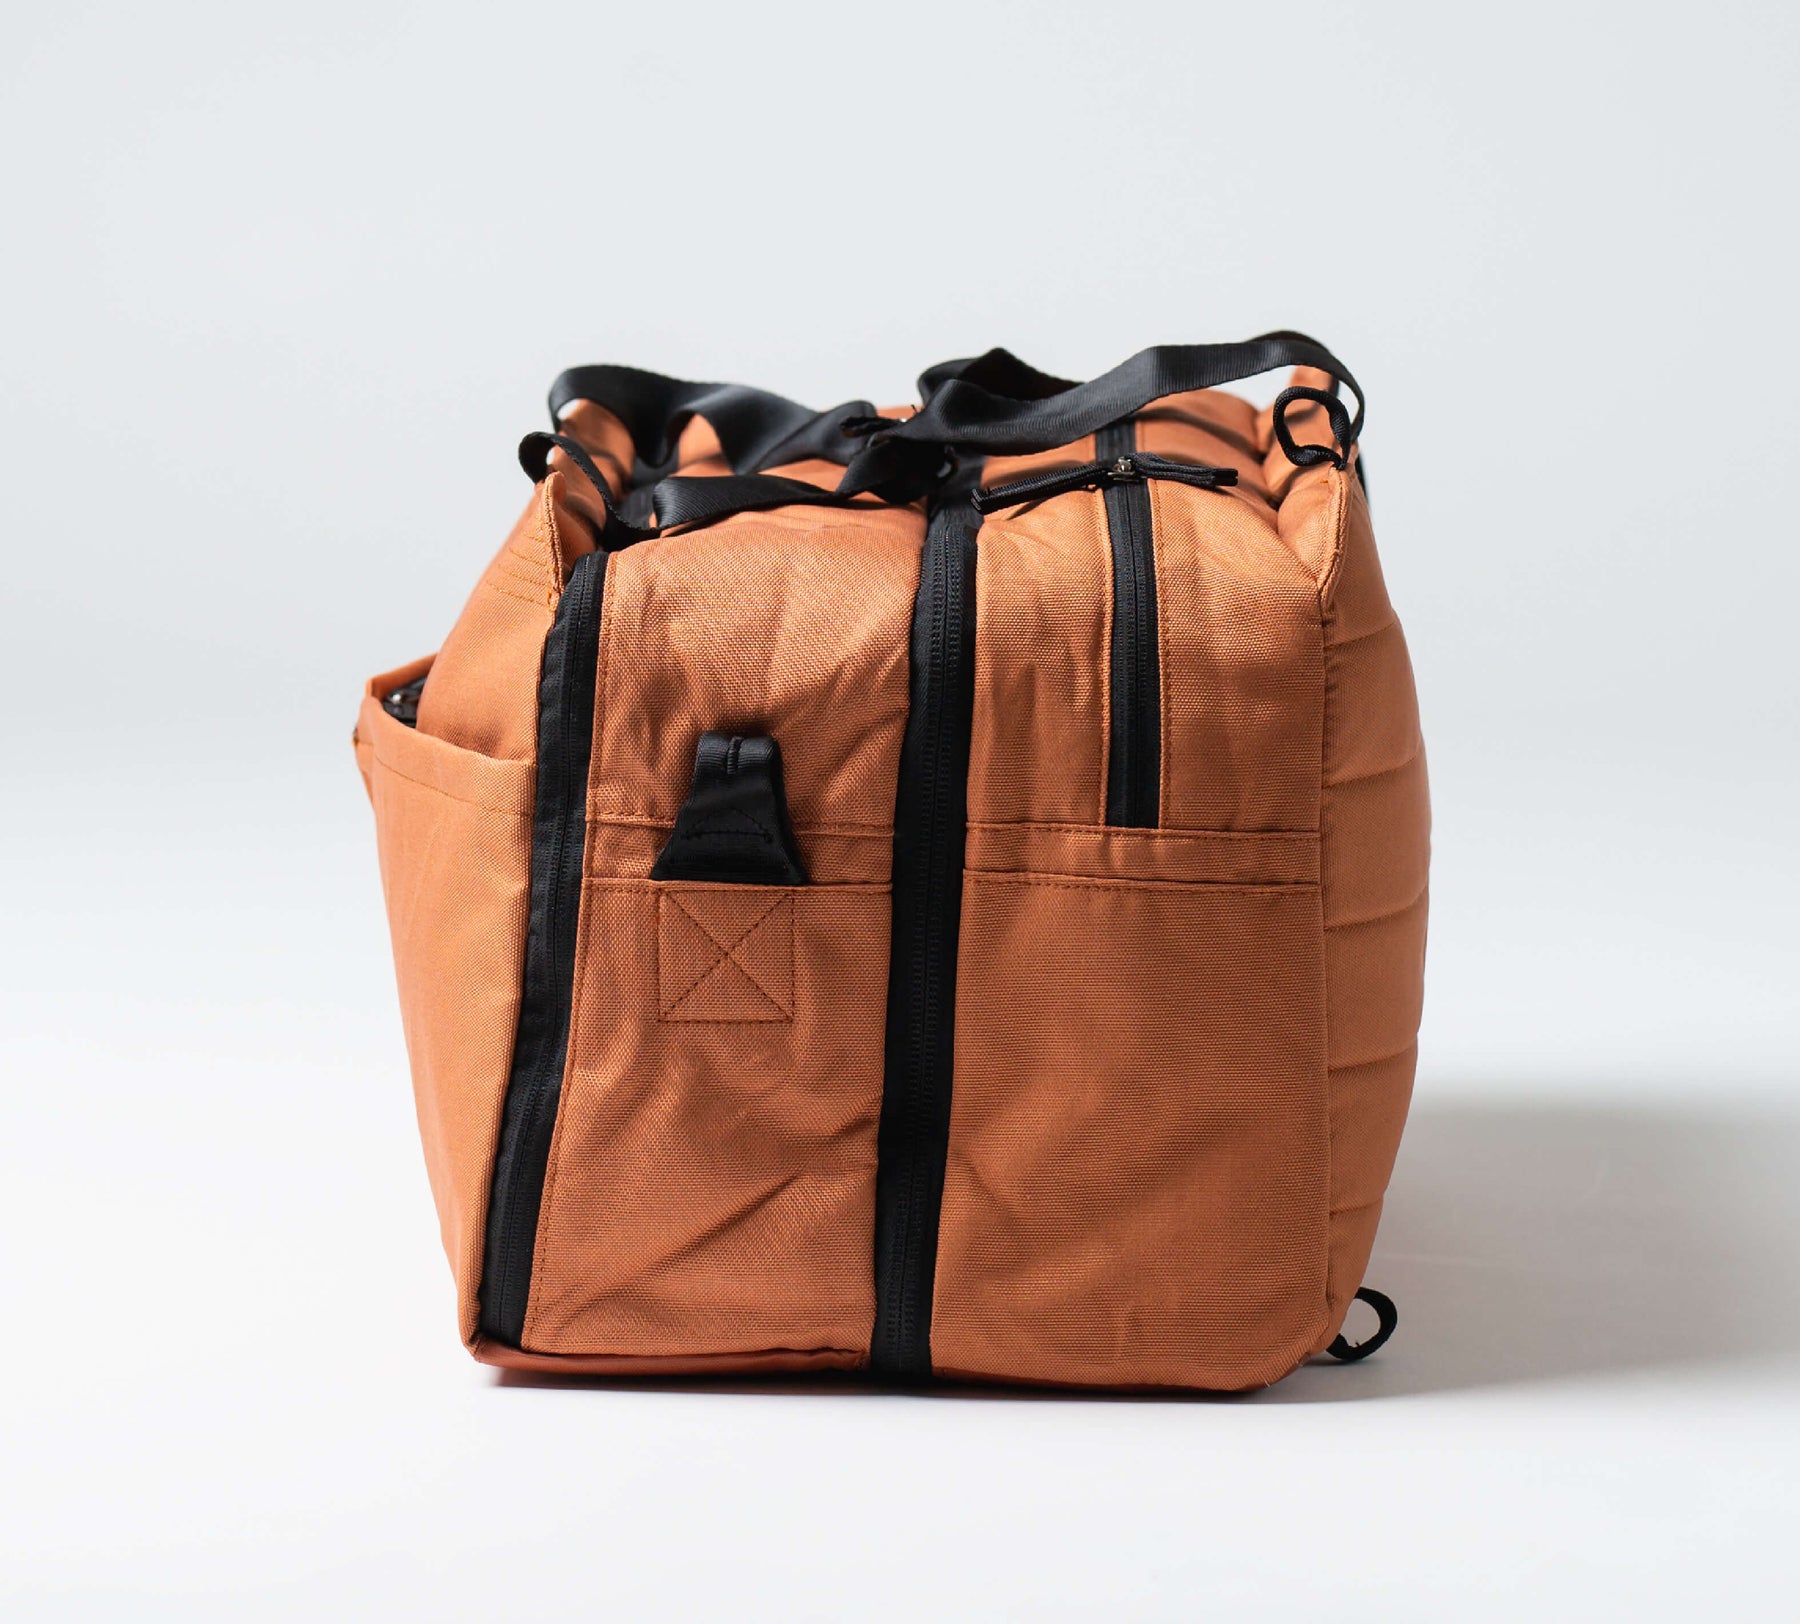 side view of the 50L Anywhere Duffel / Backpack hybrid bag